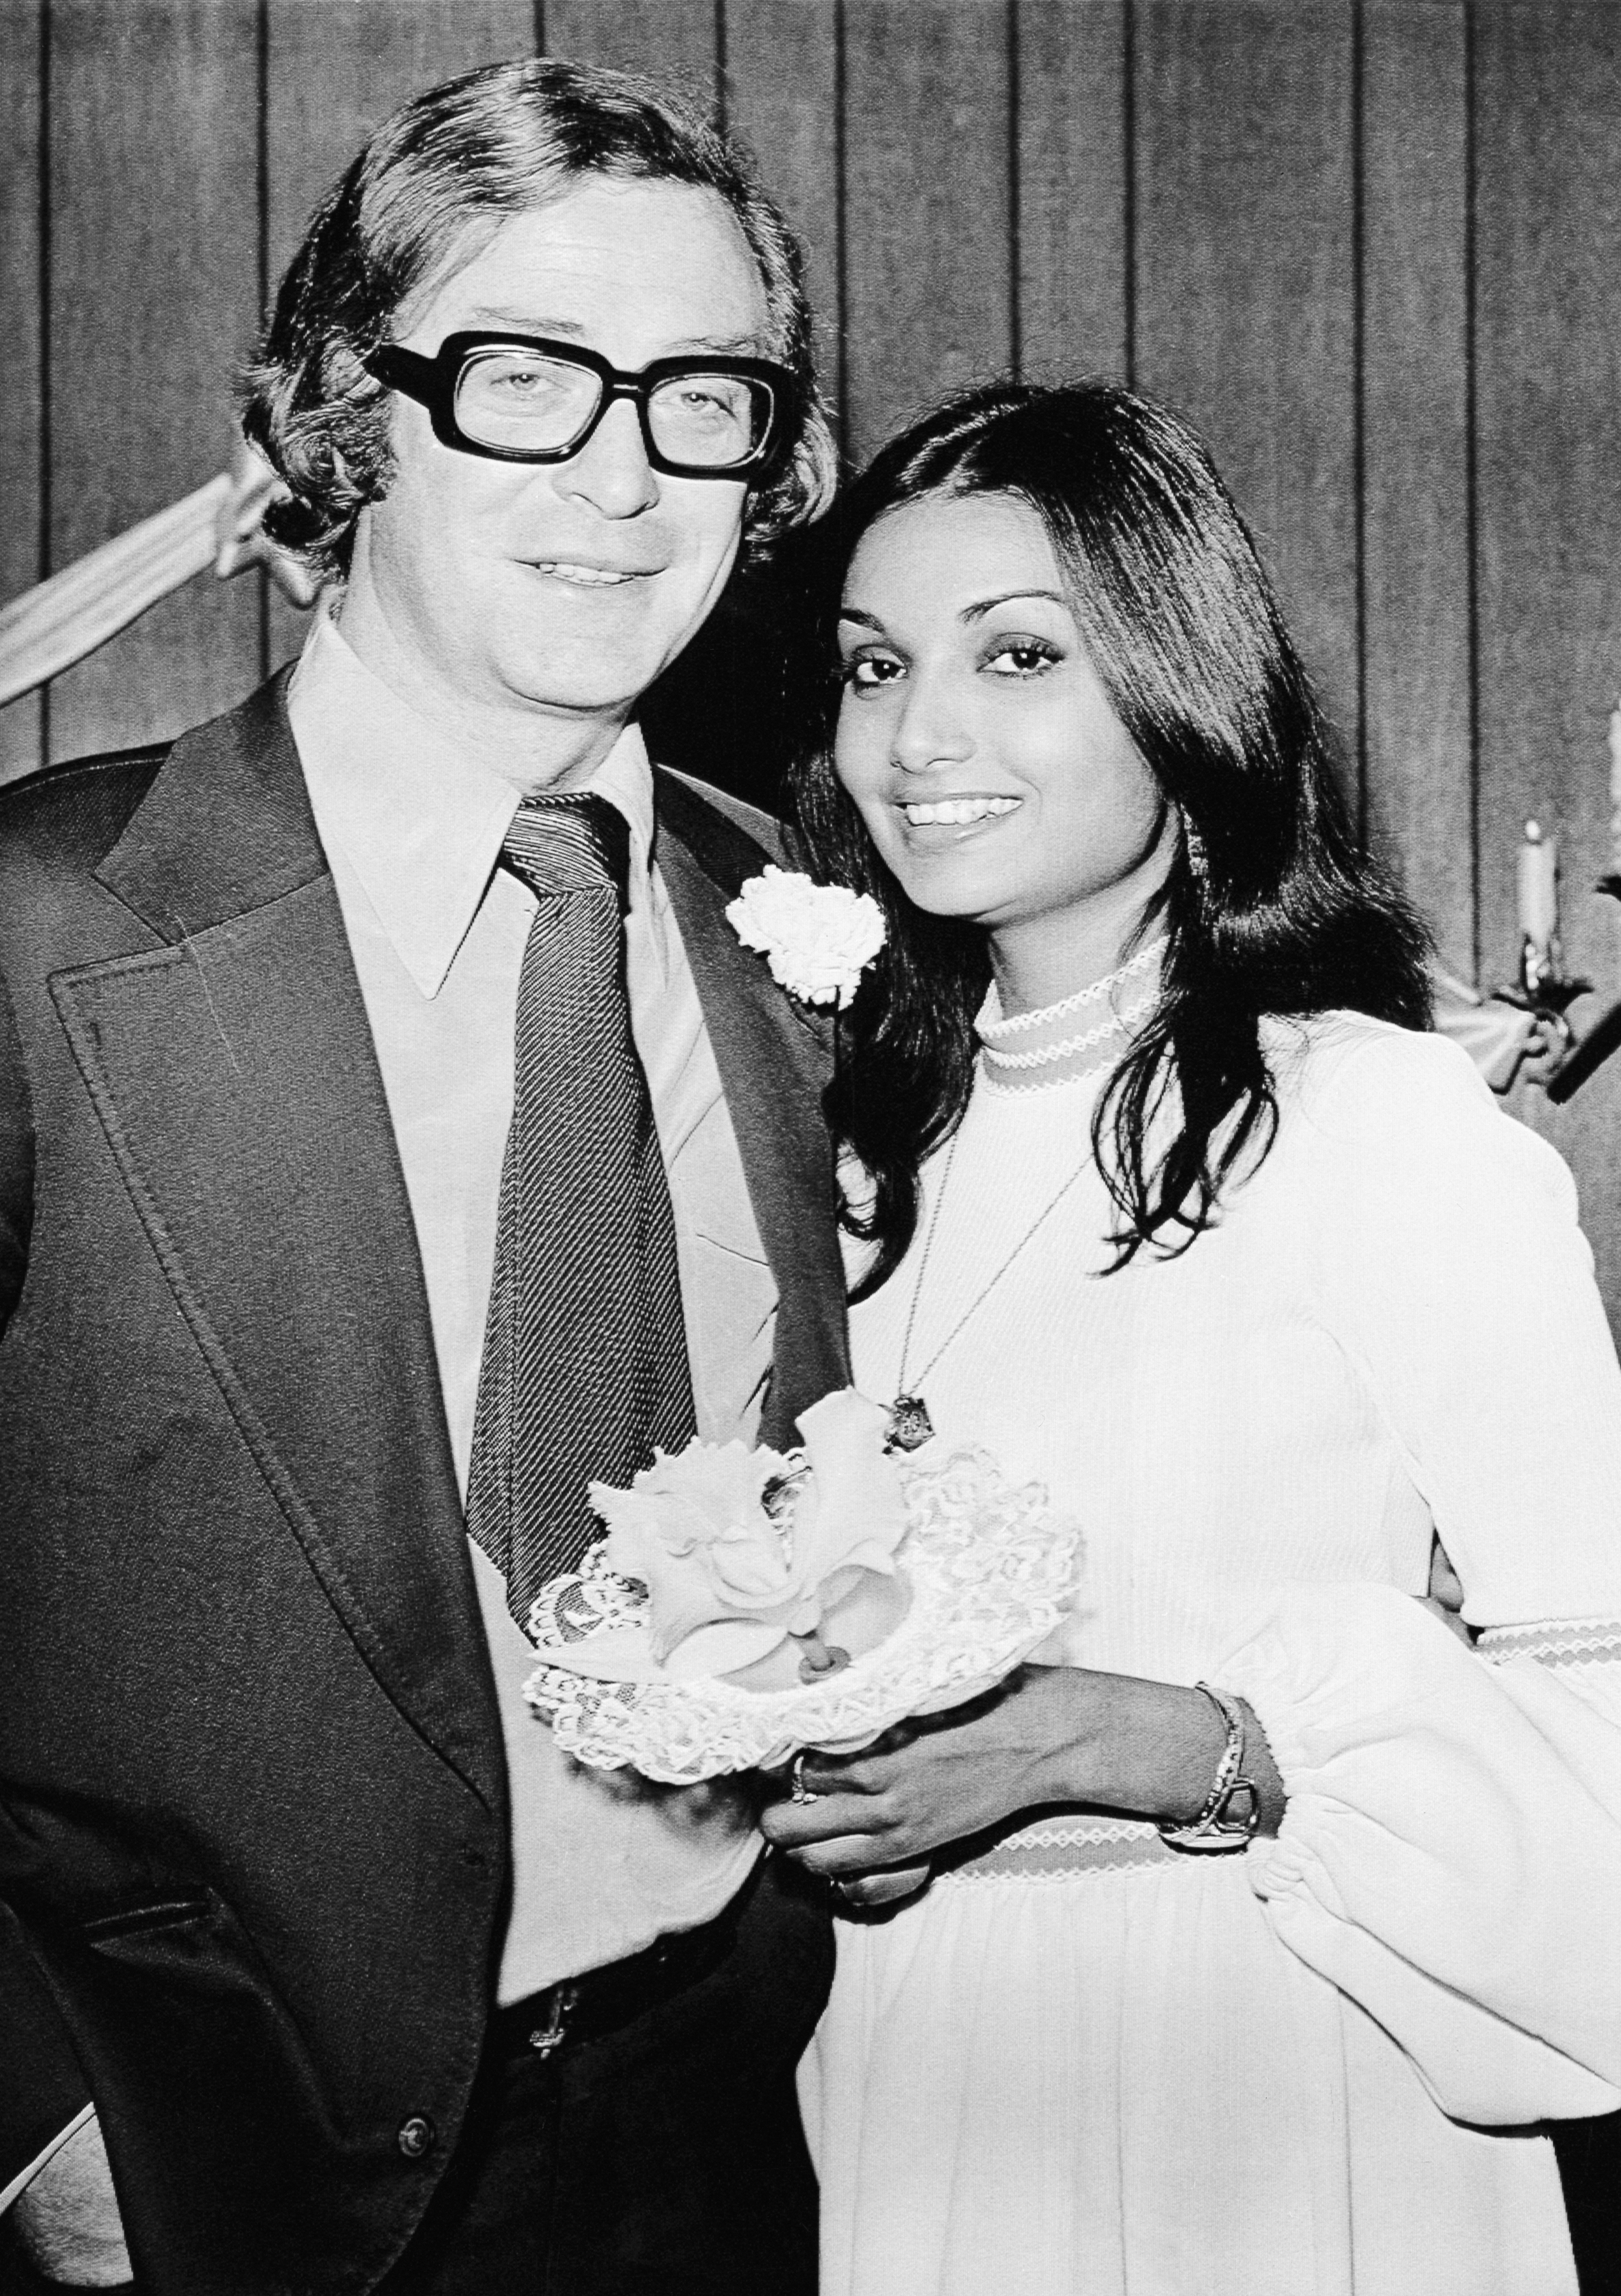 Michael Caine and Shakira Caine on their wedding day on January 8, 1978  in Las Vegas. | Source: Getty Images